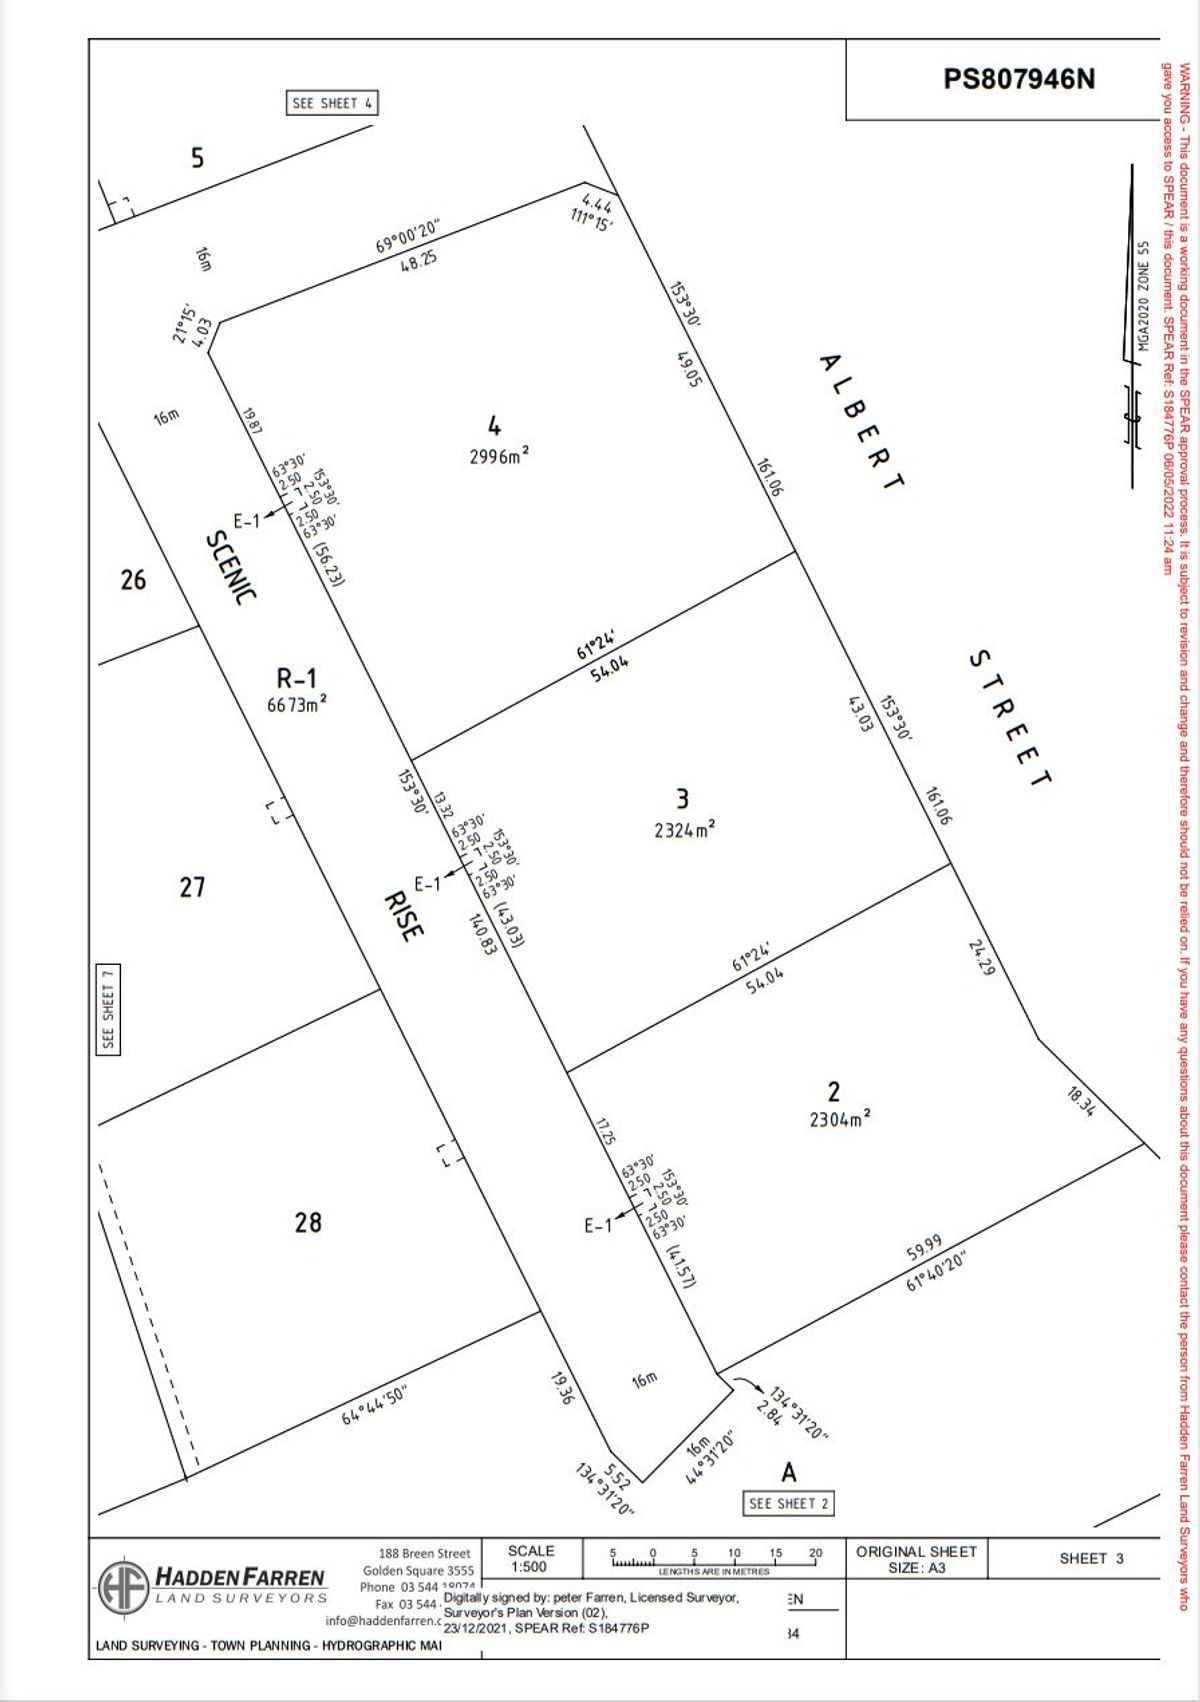 Page 3 Plan of subdivision